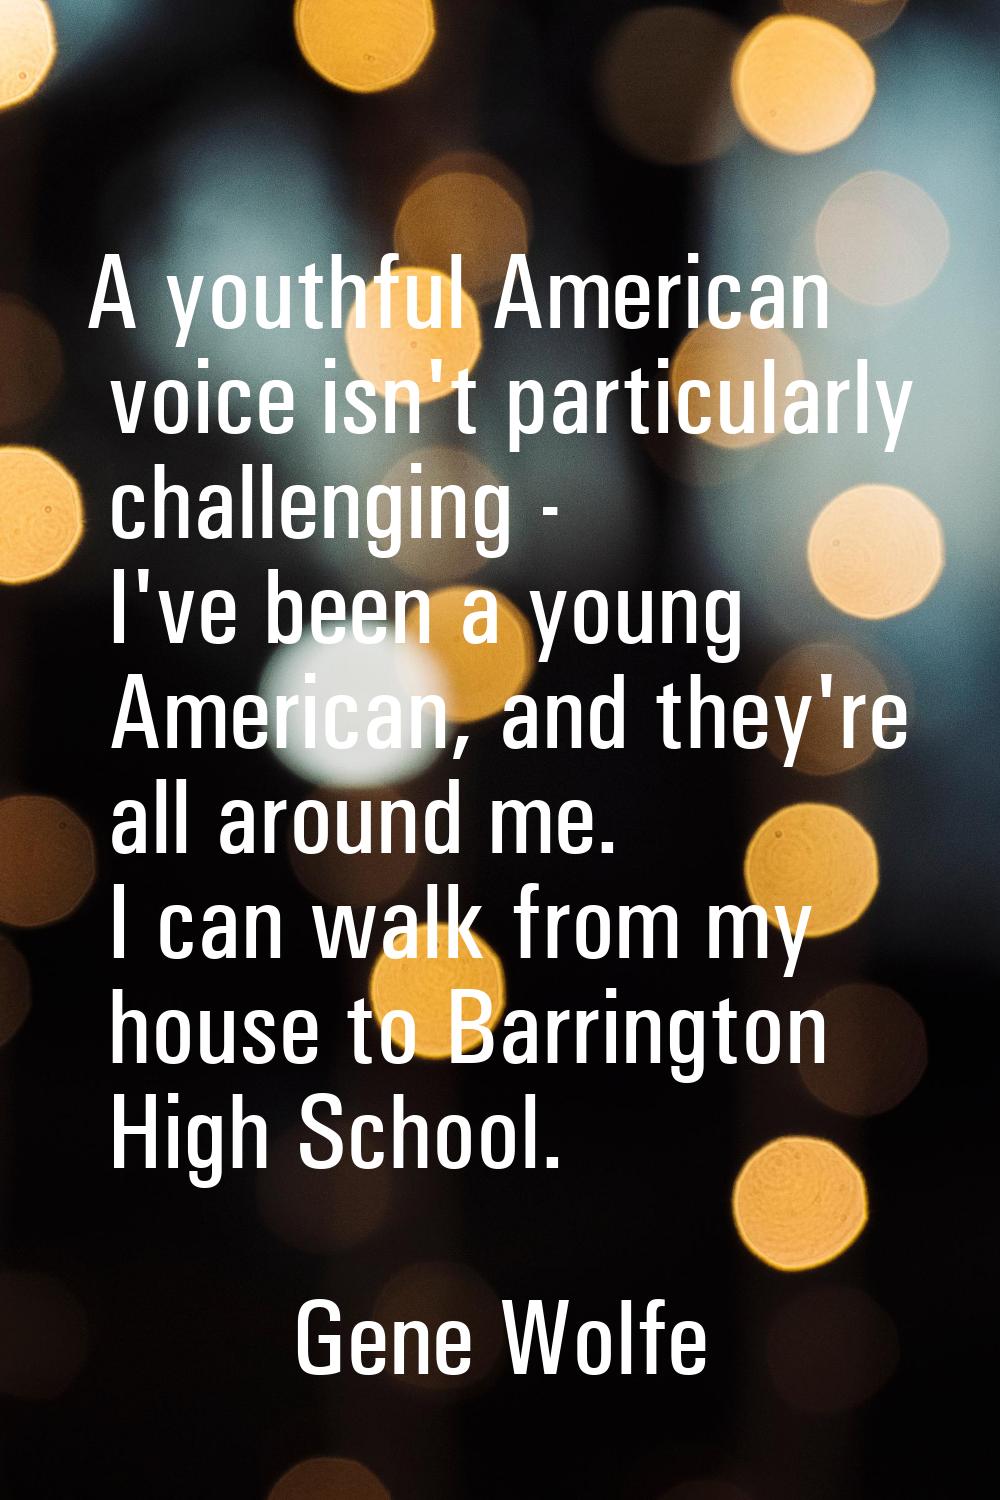 A youthful American voice isn't particularly challenging - I've been a young American, and they're 